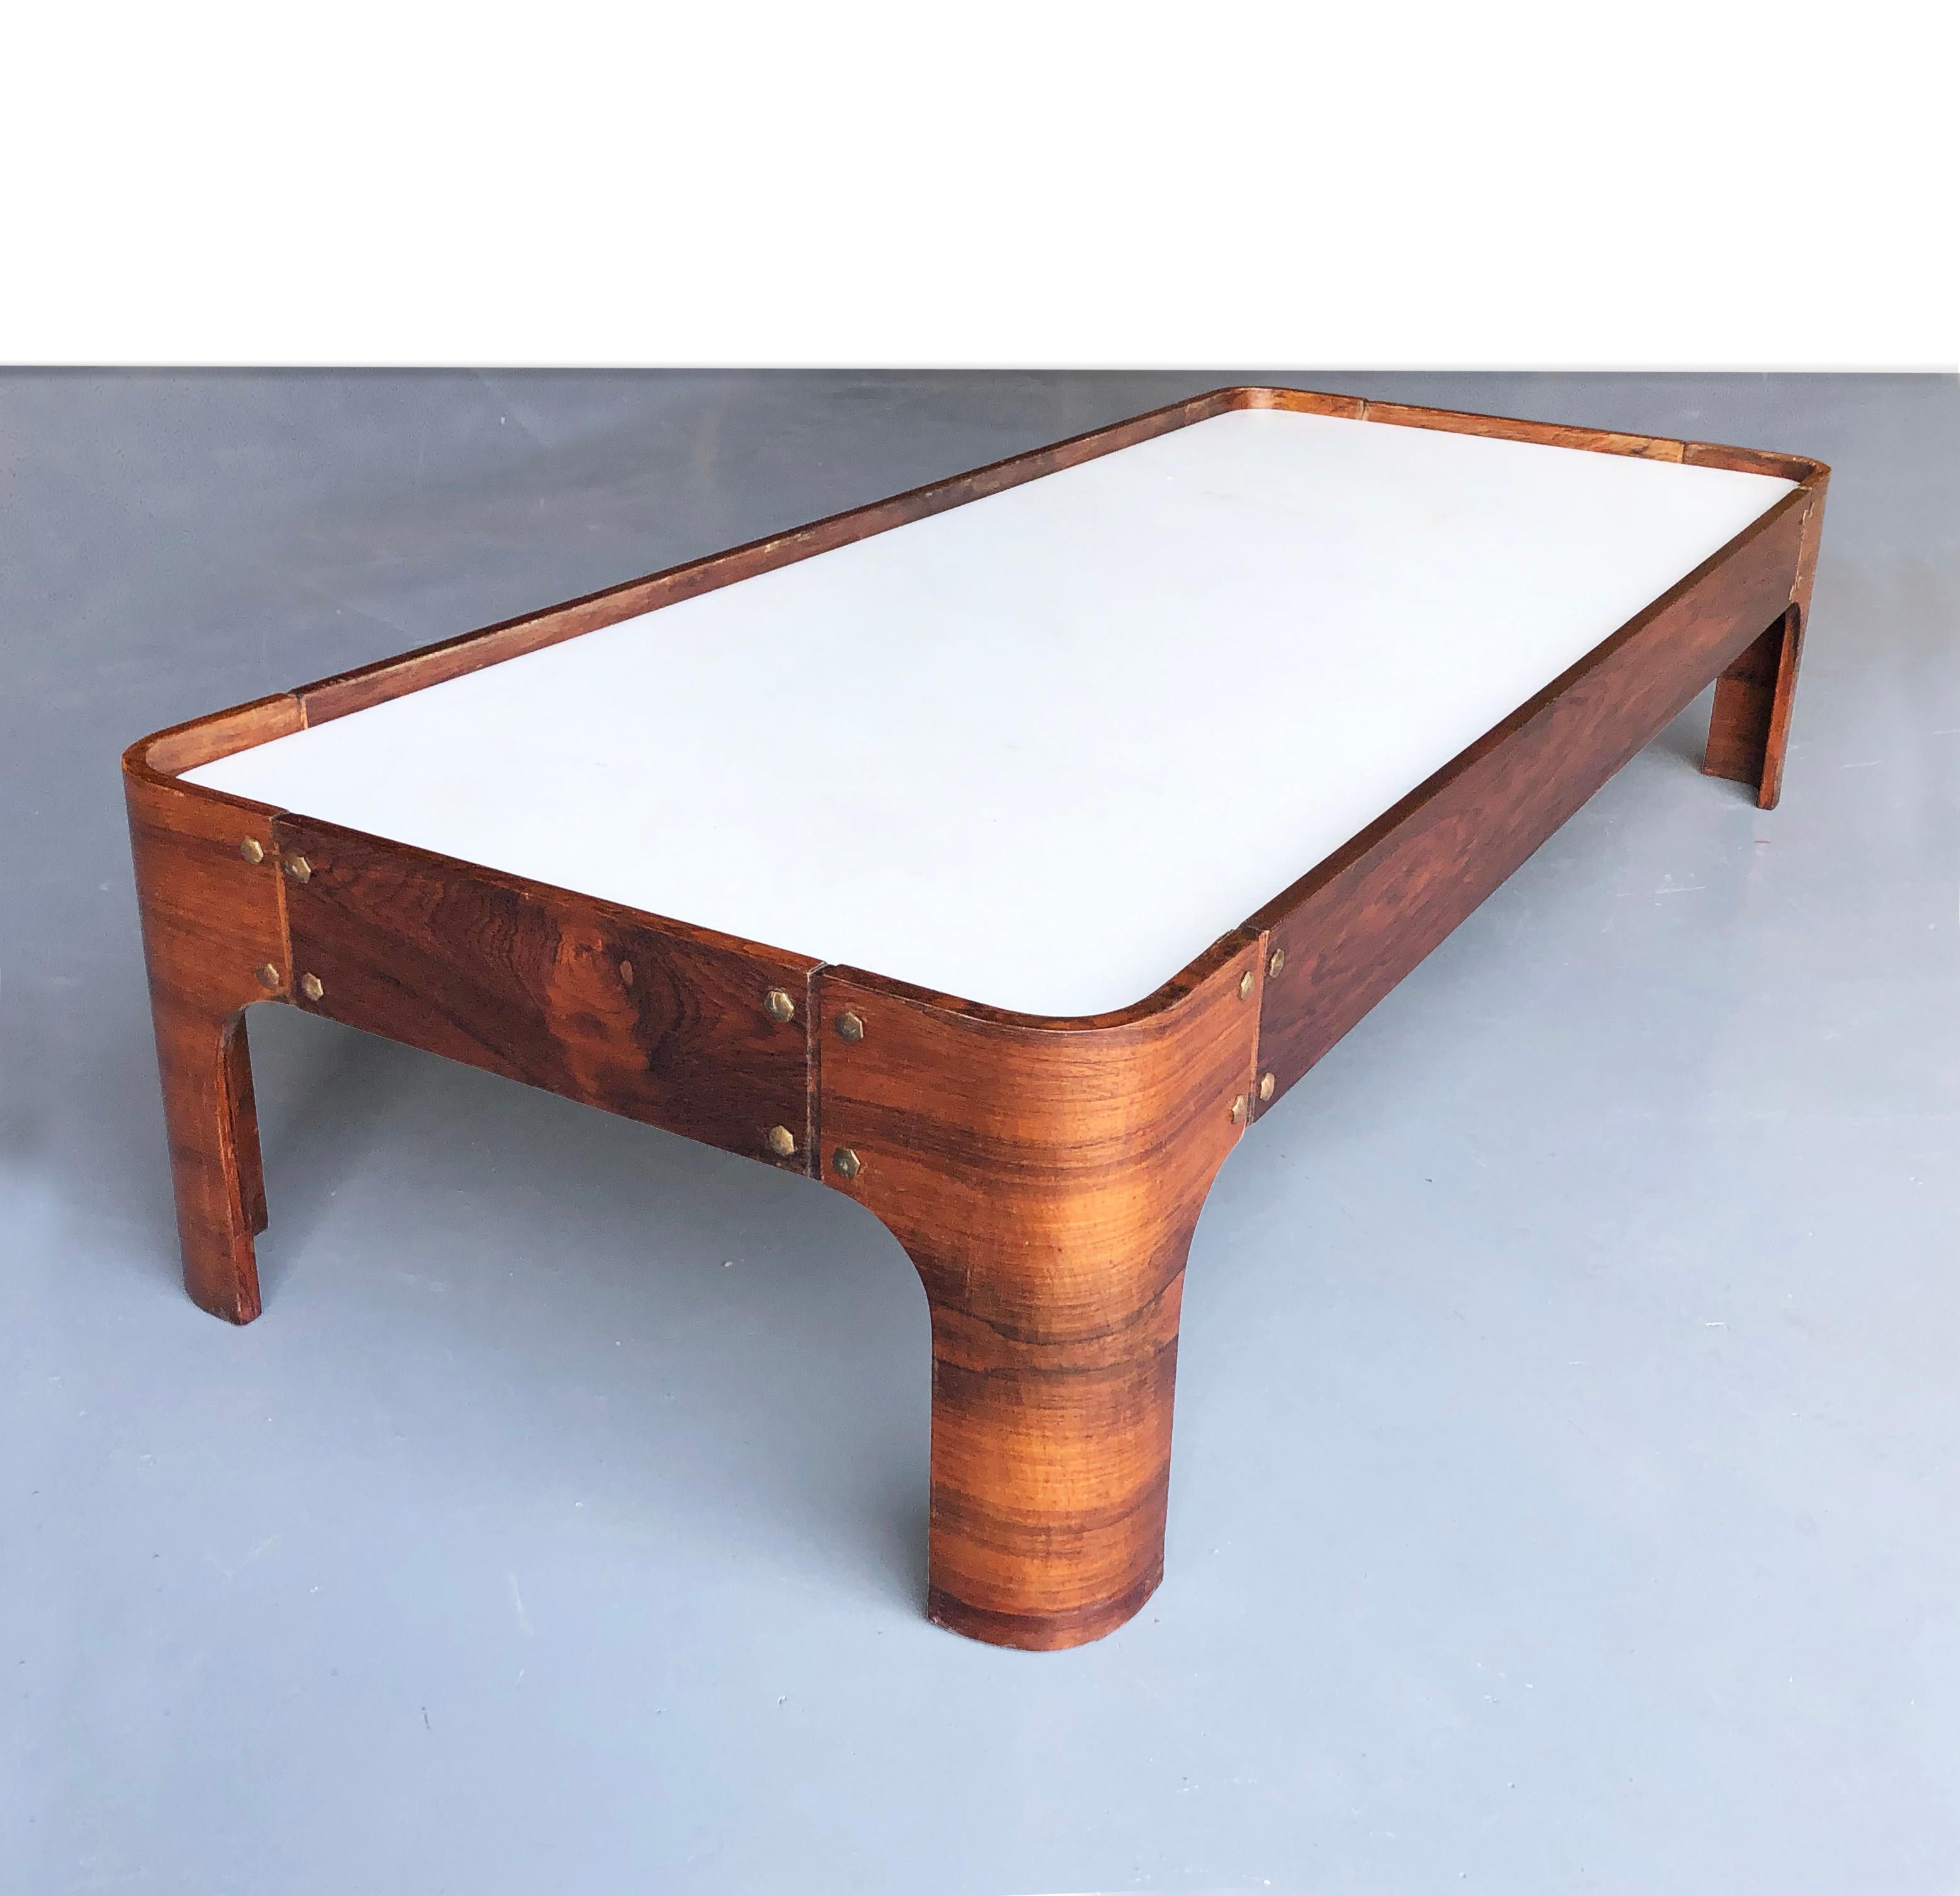 Amazing set of Veneered wood tables by Novo Rumo
Brazil 1960s.
A long coffee table and 2 side tables, in tropical wood finish. 

Beautiful white marble tops. Lovely wood grain and original brass bolts. 
The pictures do not make justice to this set